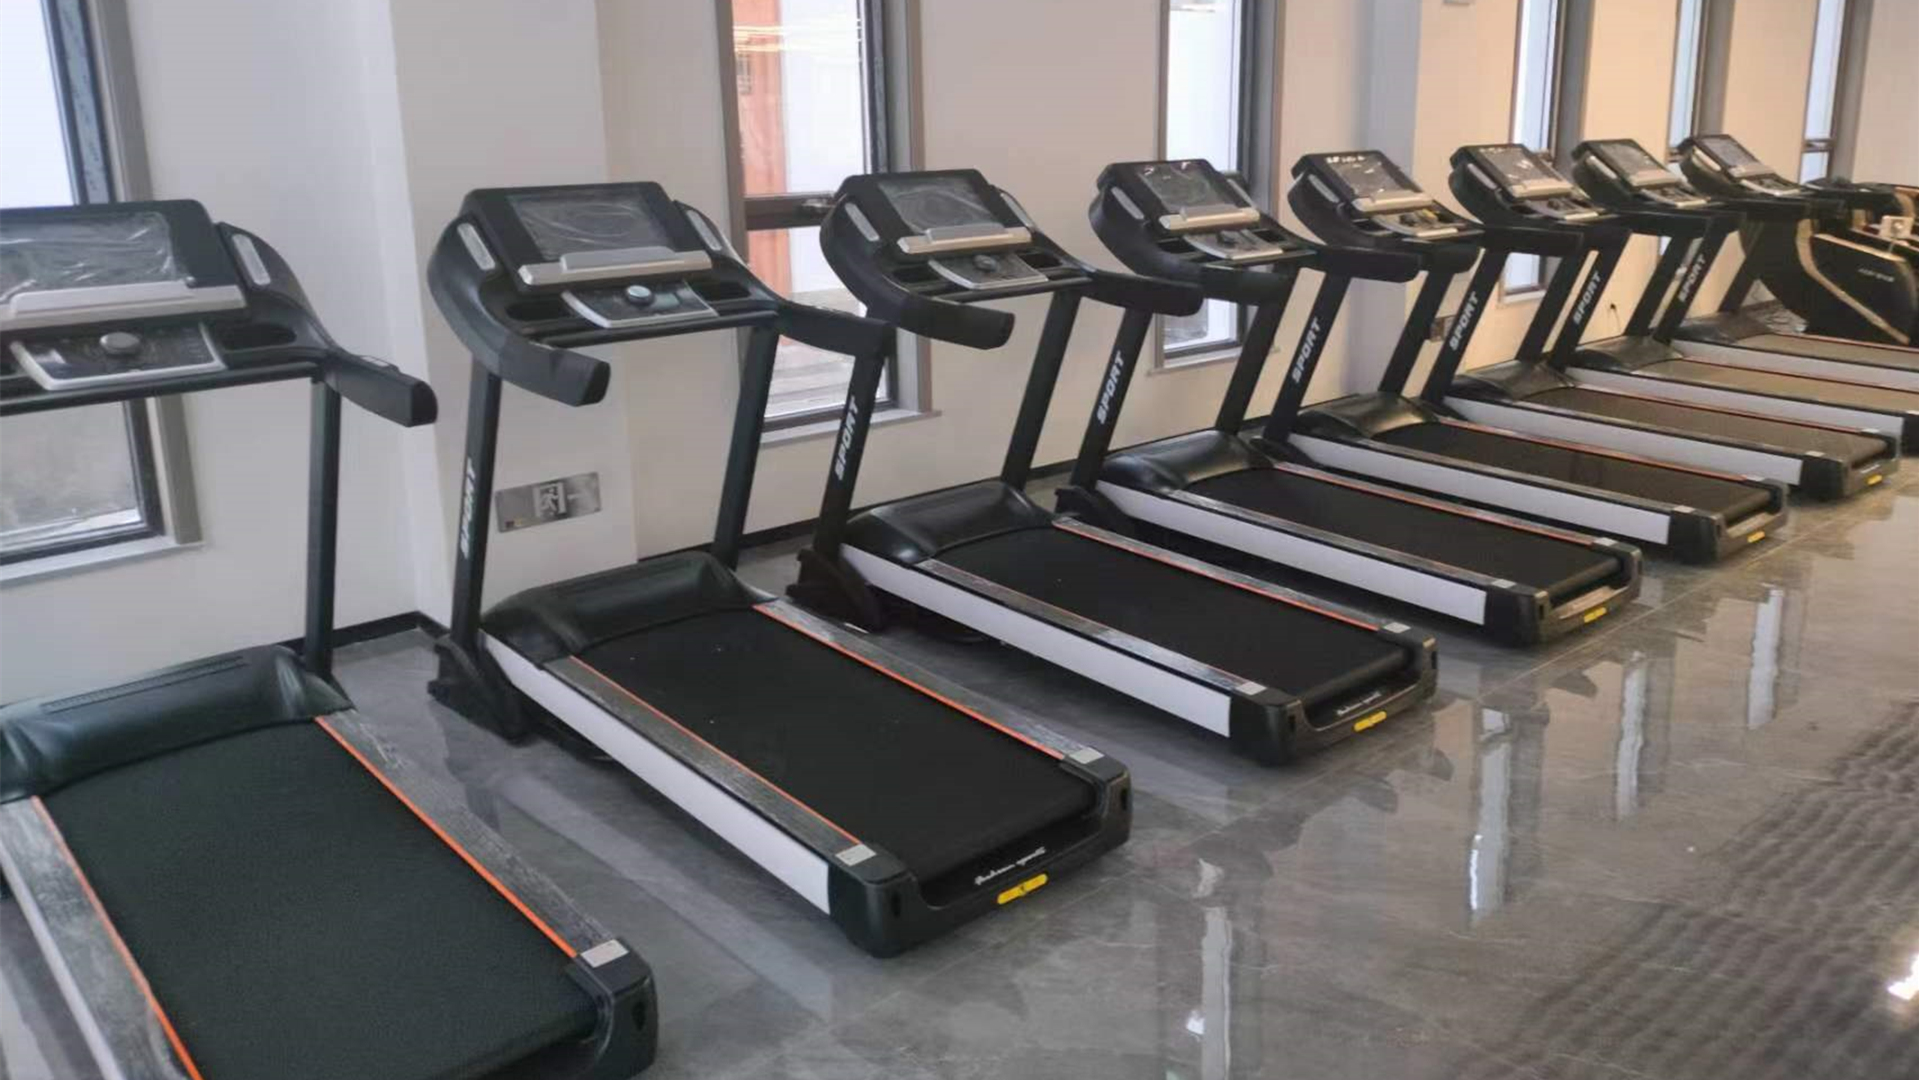 Properly configure fitness equipment for the gym to make fitness more enjoyable (5)